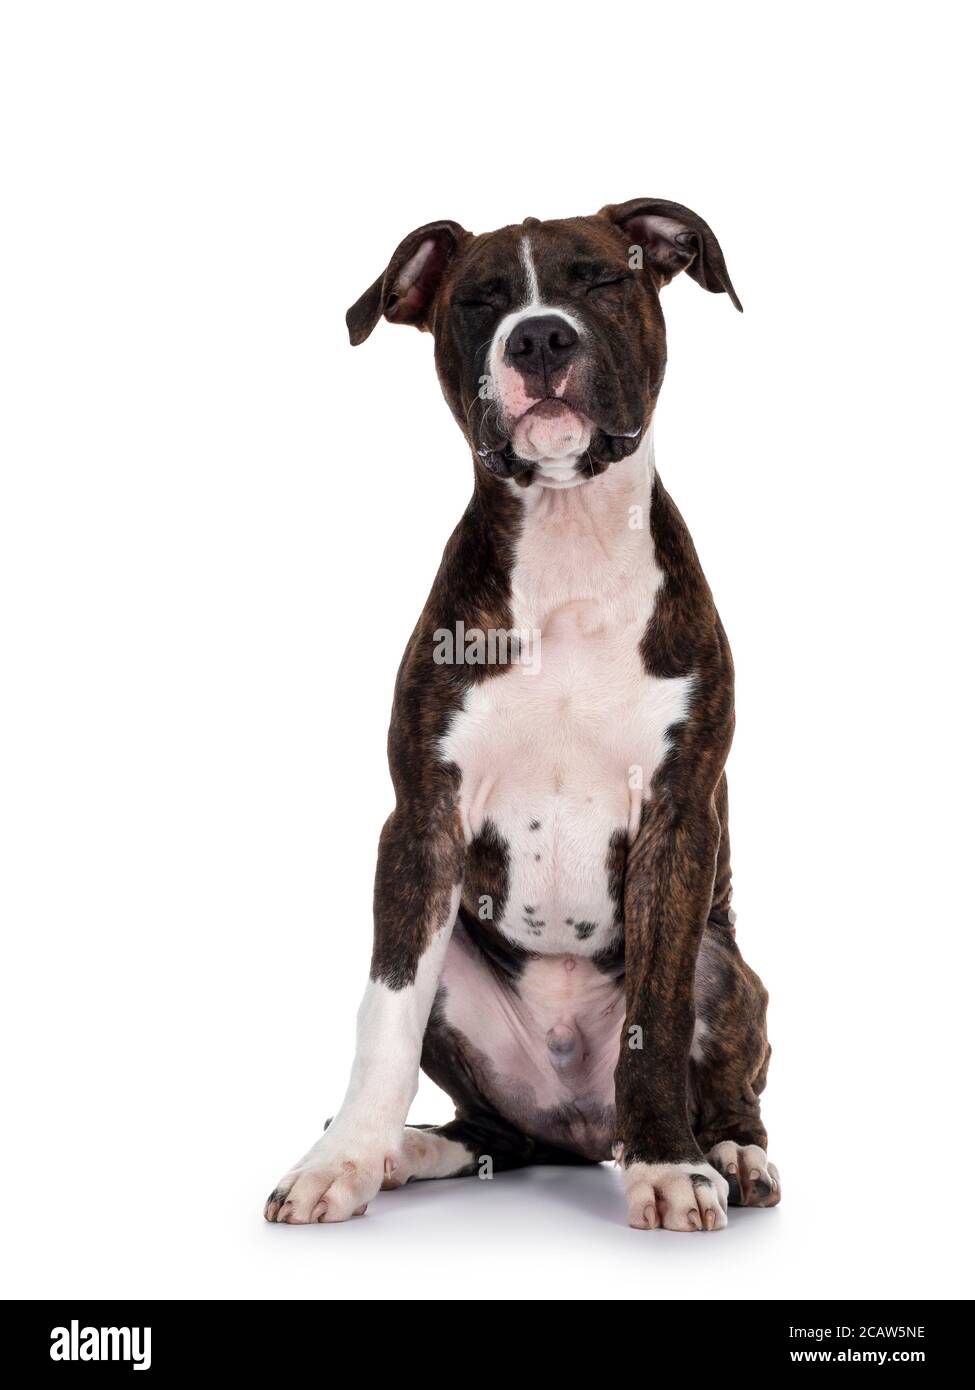 Young brindle with white American Staffordshire Terrier dog, sitting up facing front with eyes firmly shut. Isolated on white background. Stock Photo